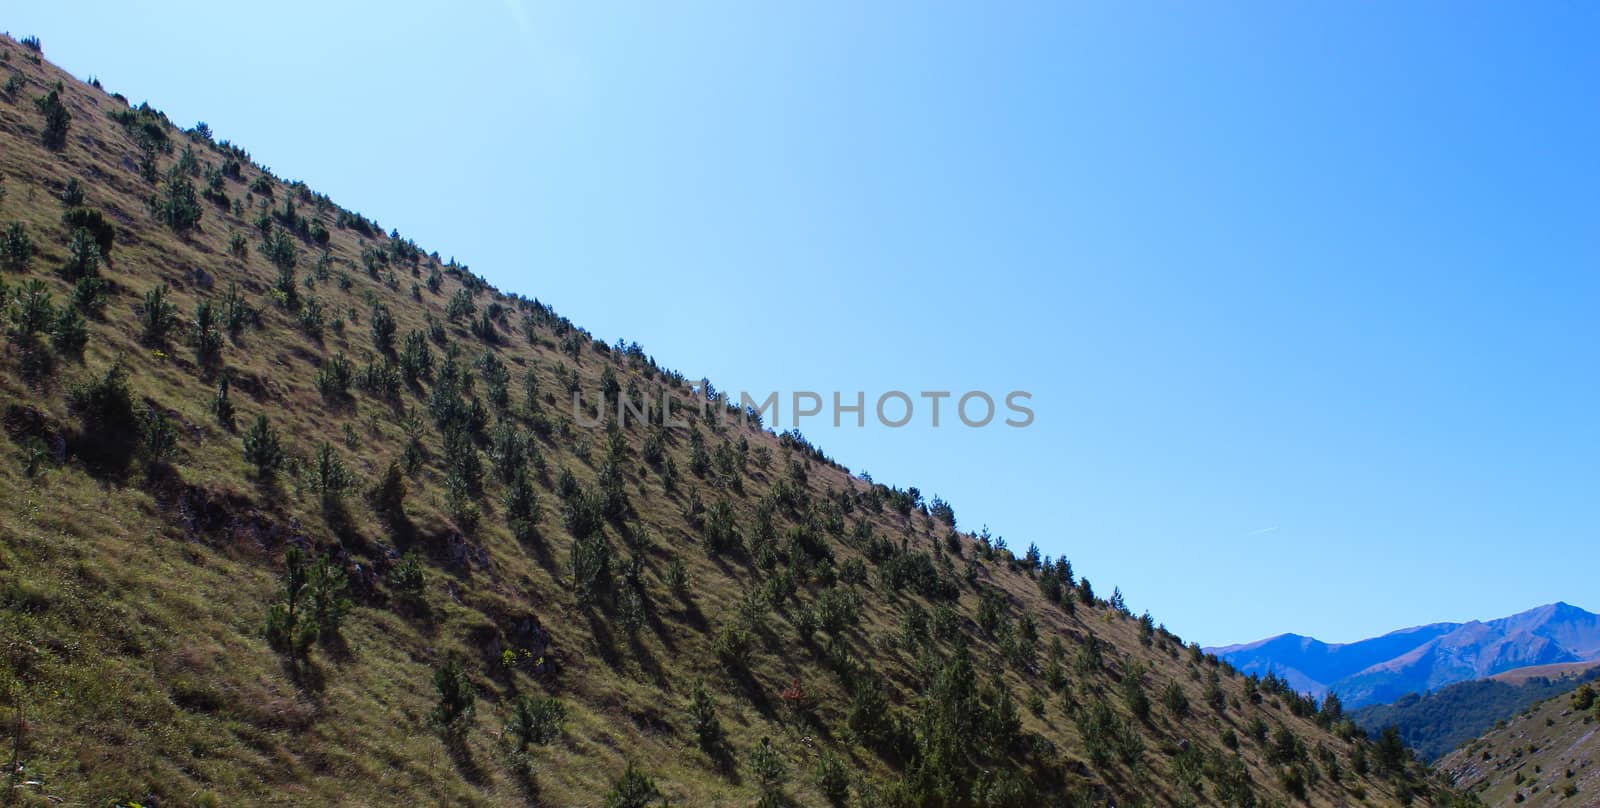 The hill is forested with coniferous trees, and in the long distance there are mountains. On the way to the mountain Bjelasnica, Bosnia and Herzegovina.